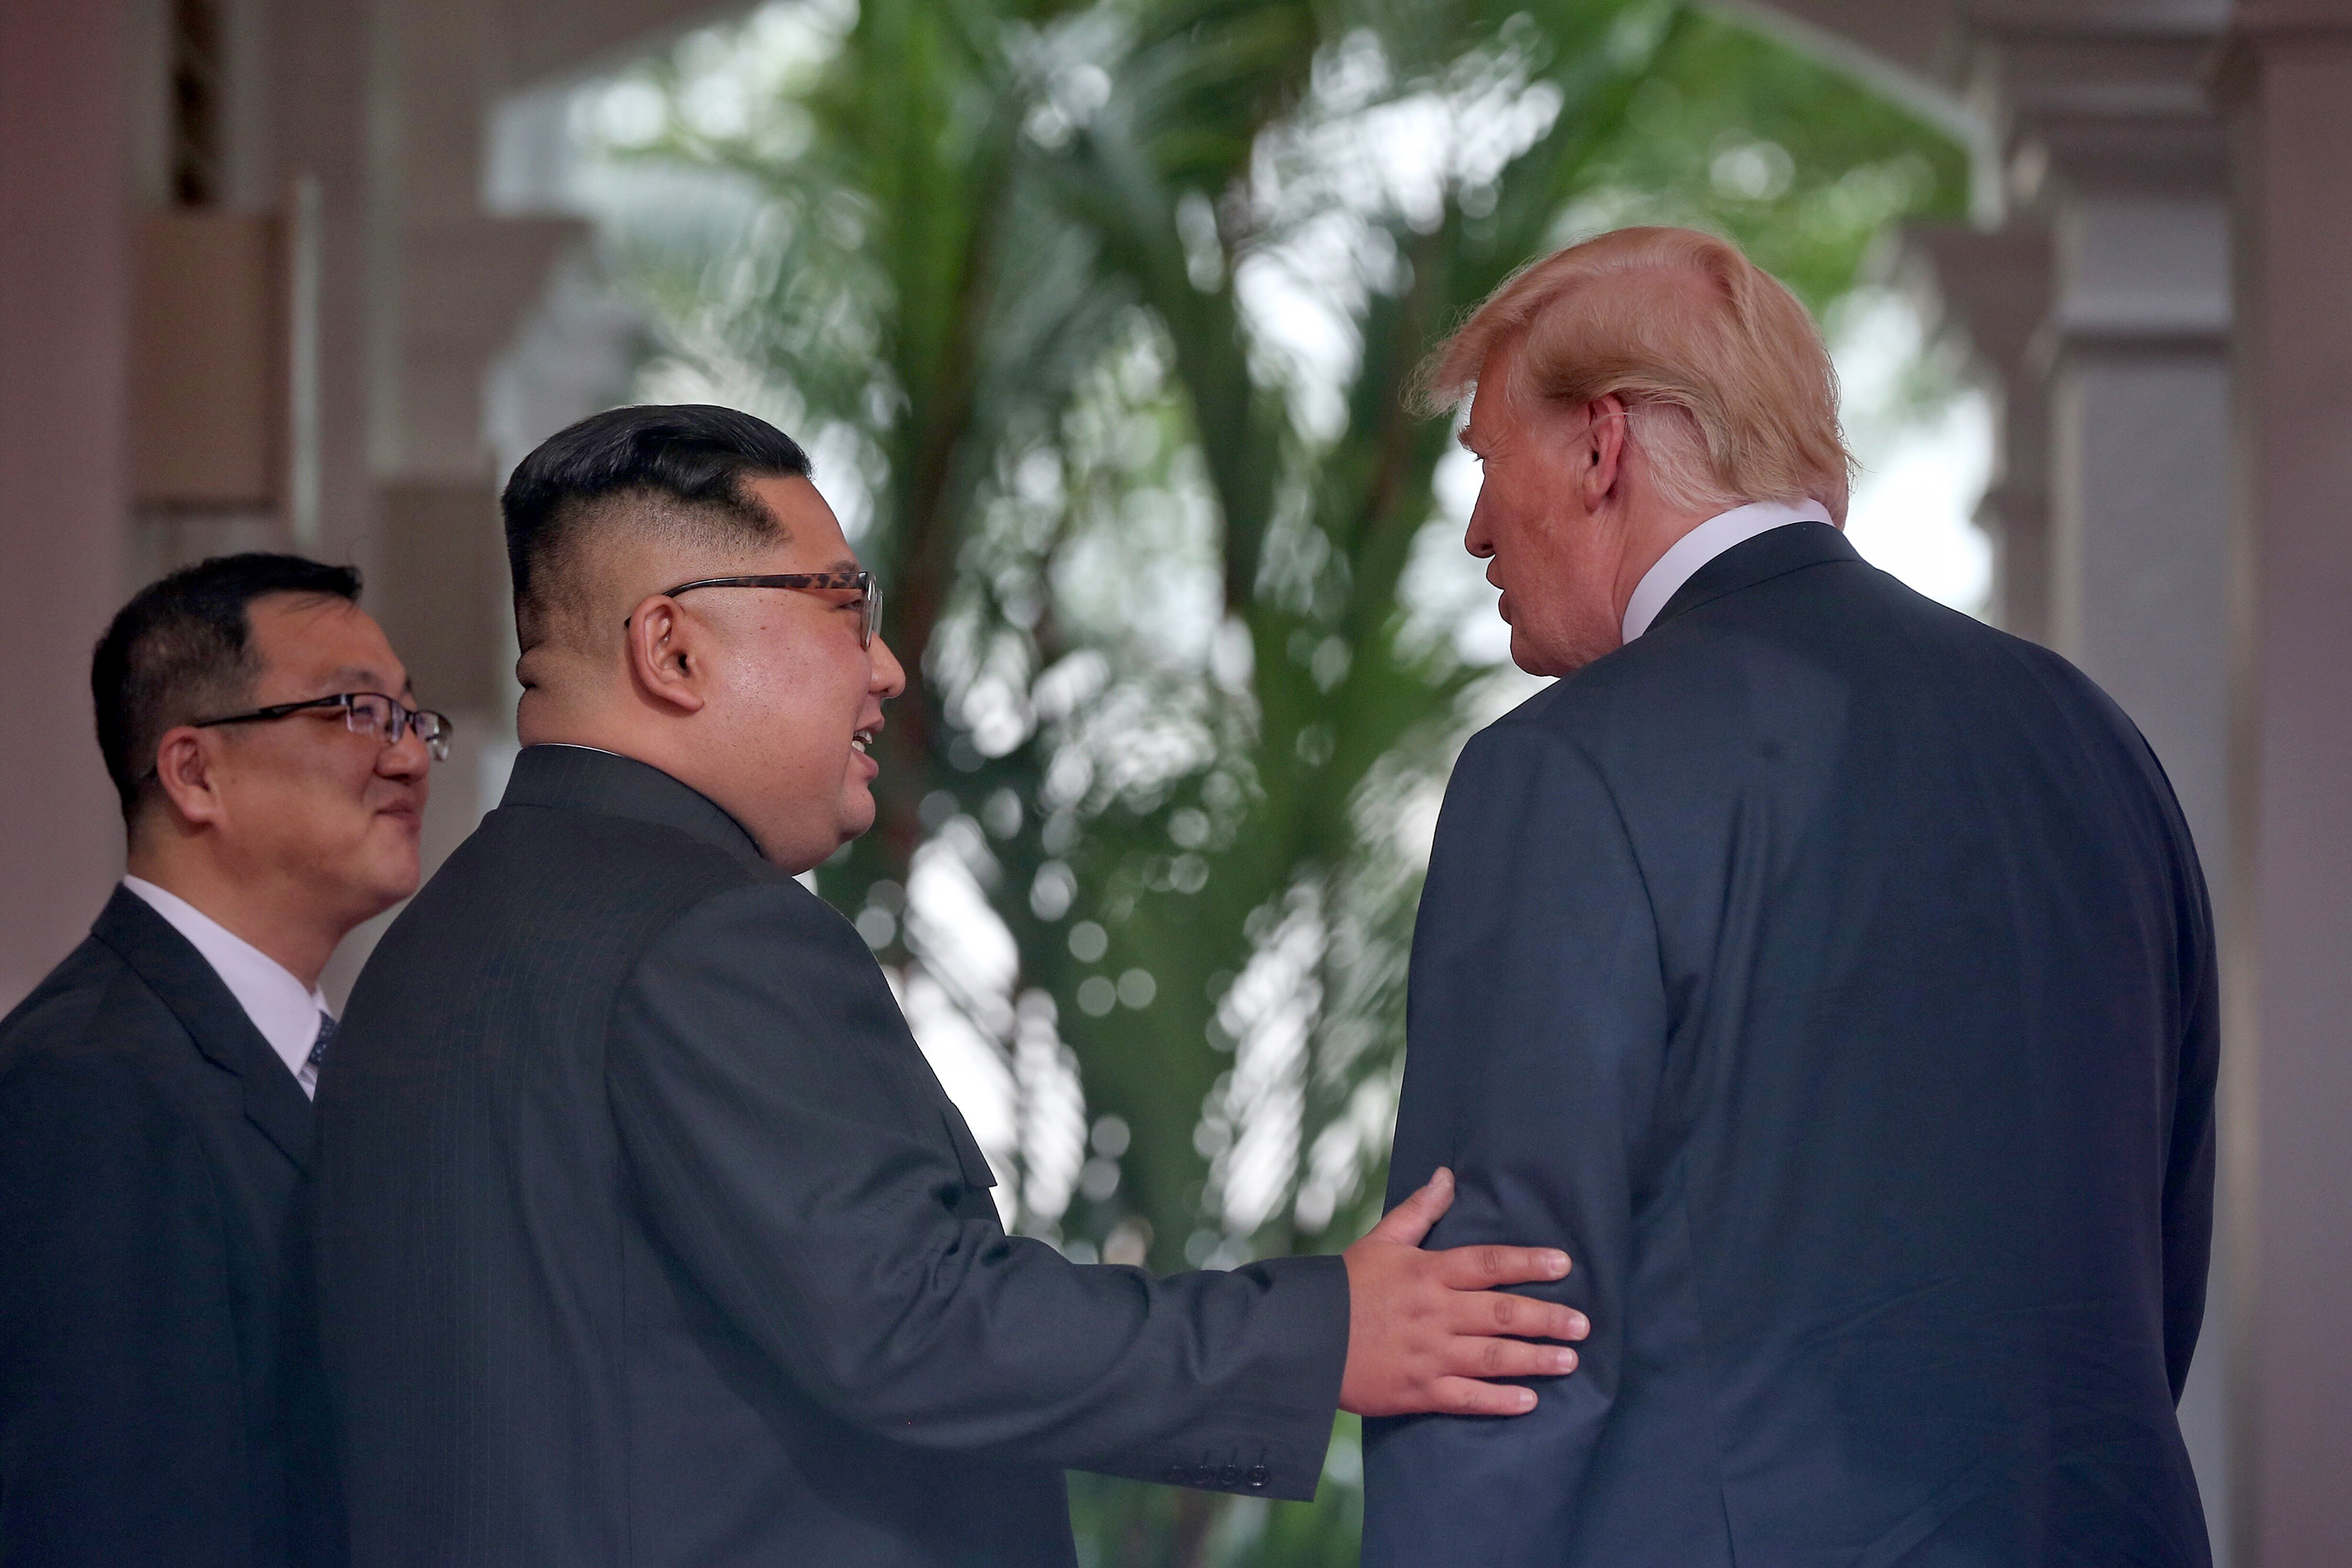 North Korean leader Kim Jong Un touches the arm of PresidentTrump shortly after meeting at their summit in Singapore on June 12, 2018. (Kevin Lim—The Straits Times/Getty Images)